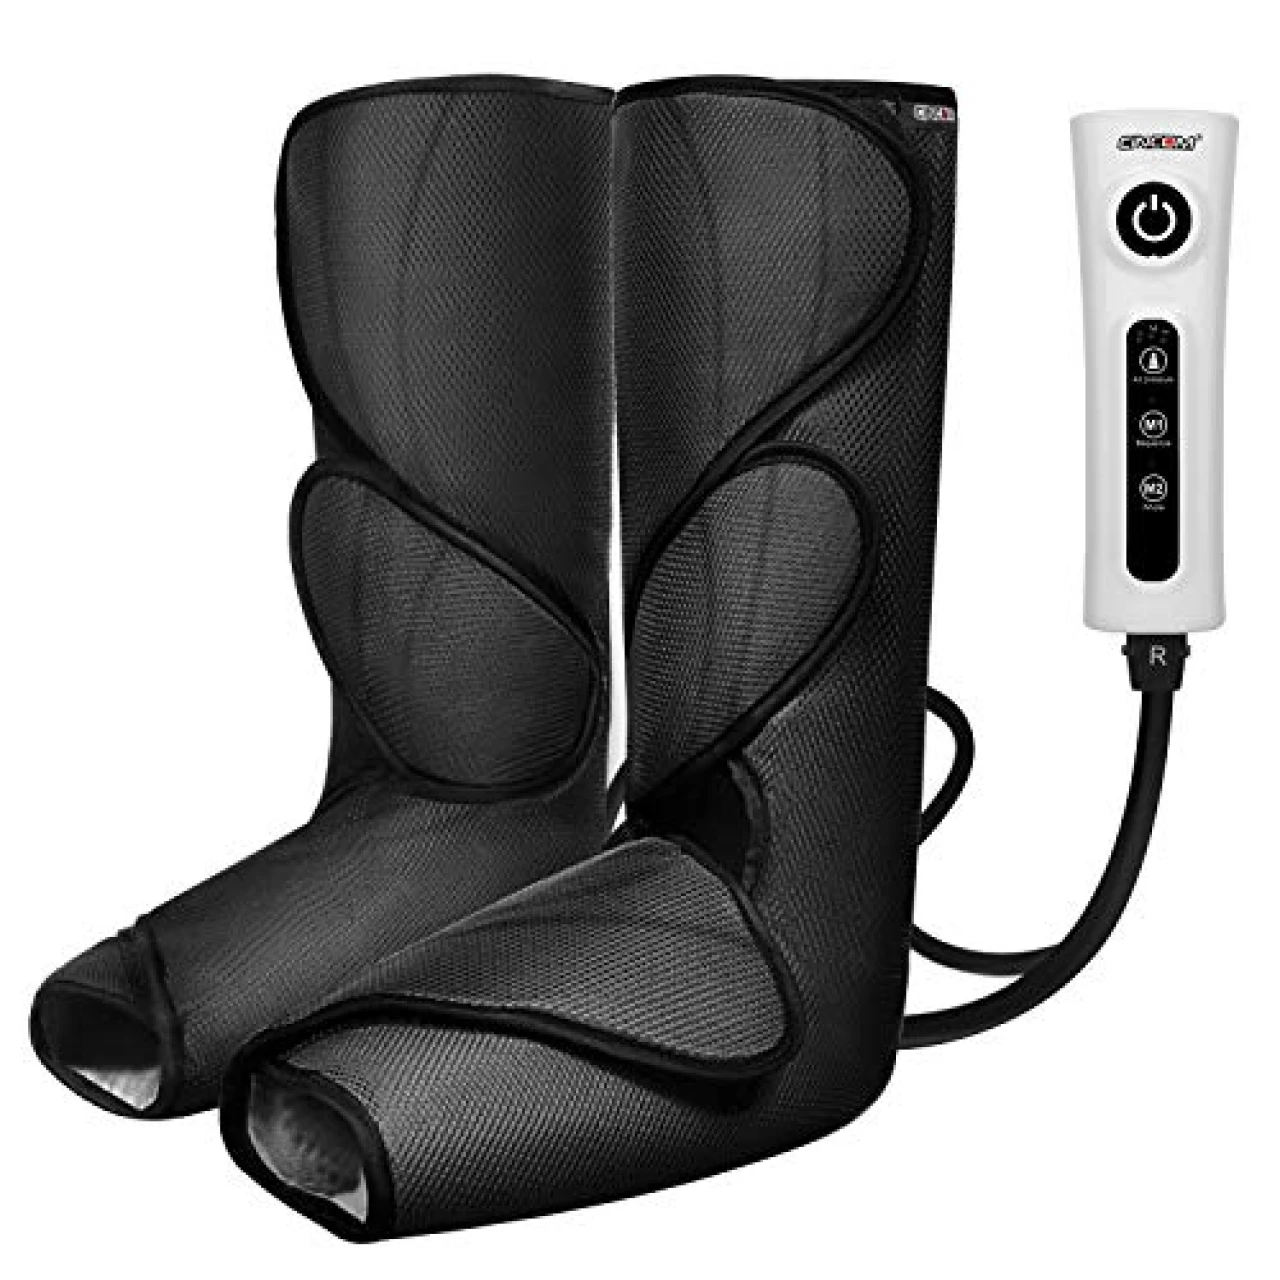 CINCOM Leg Massager for Circulation and Pain Relief, Air Compression Foot and Calf Massager